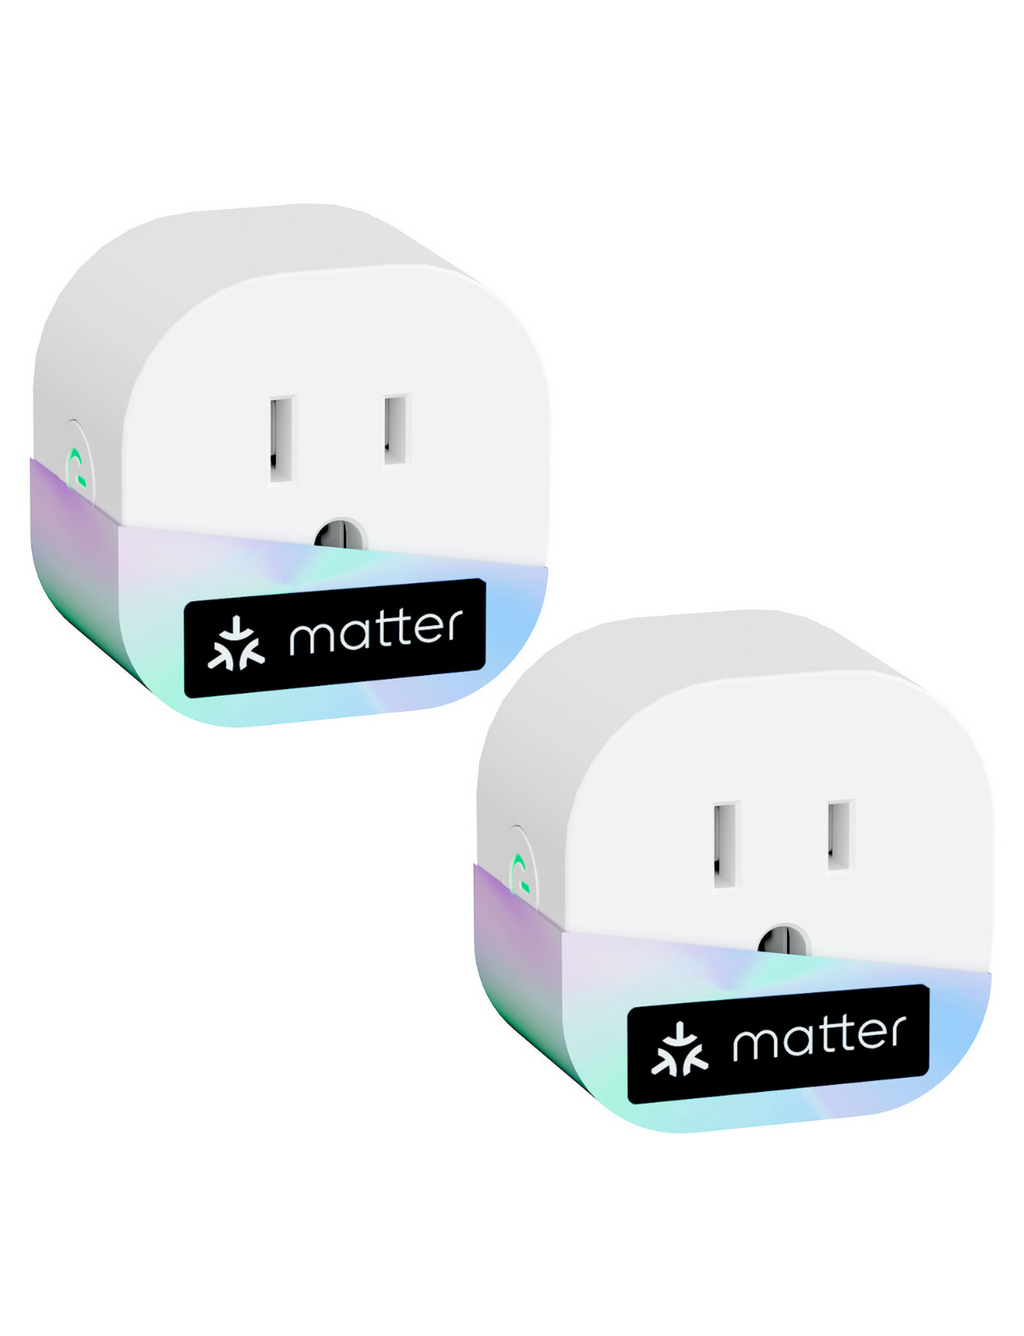 16A Electric Smart Plug - German Technology meets Indian Standards